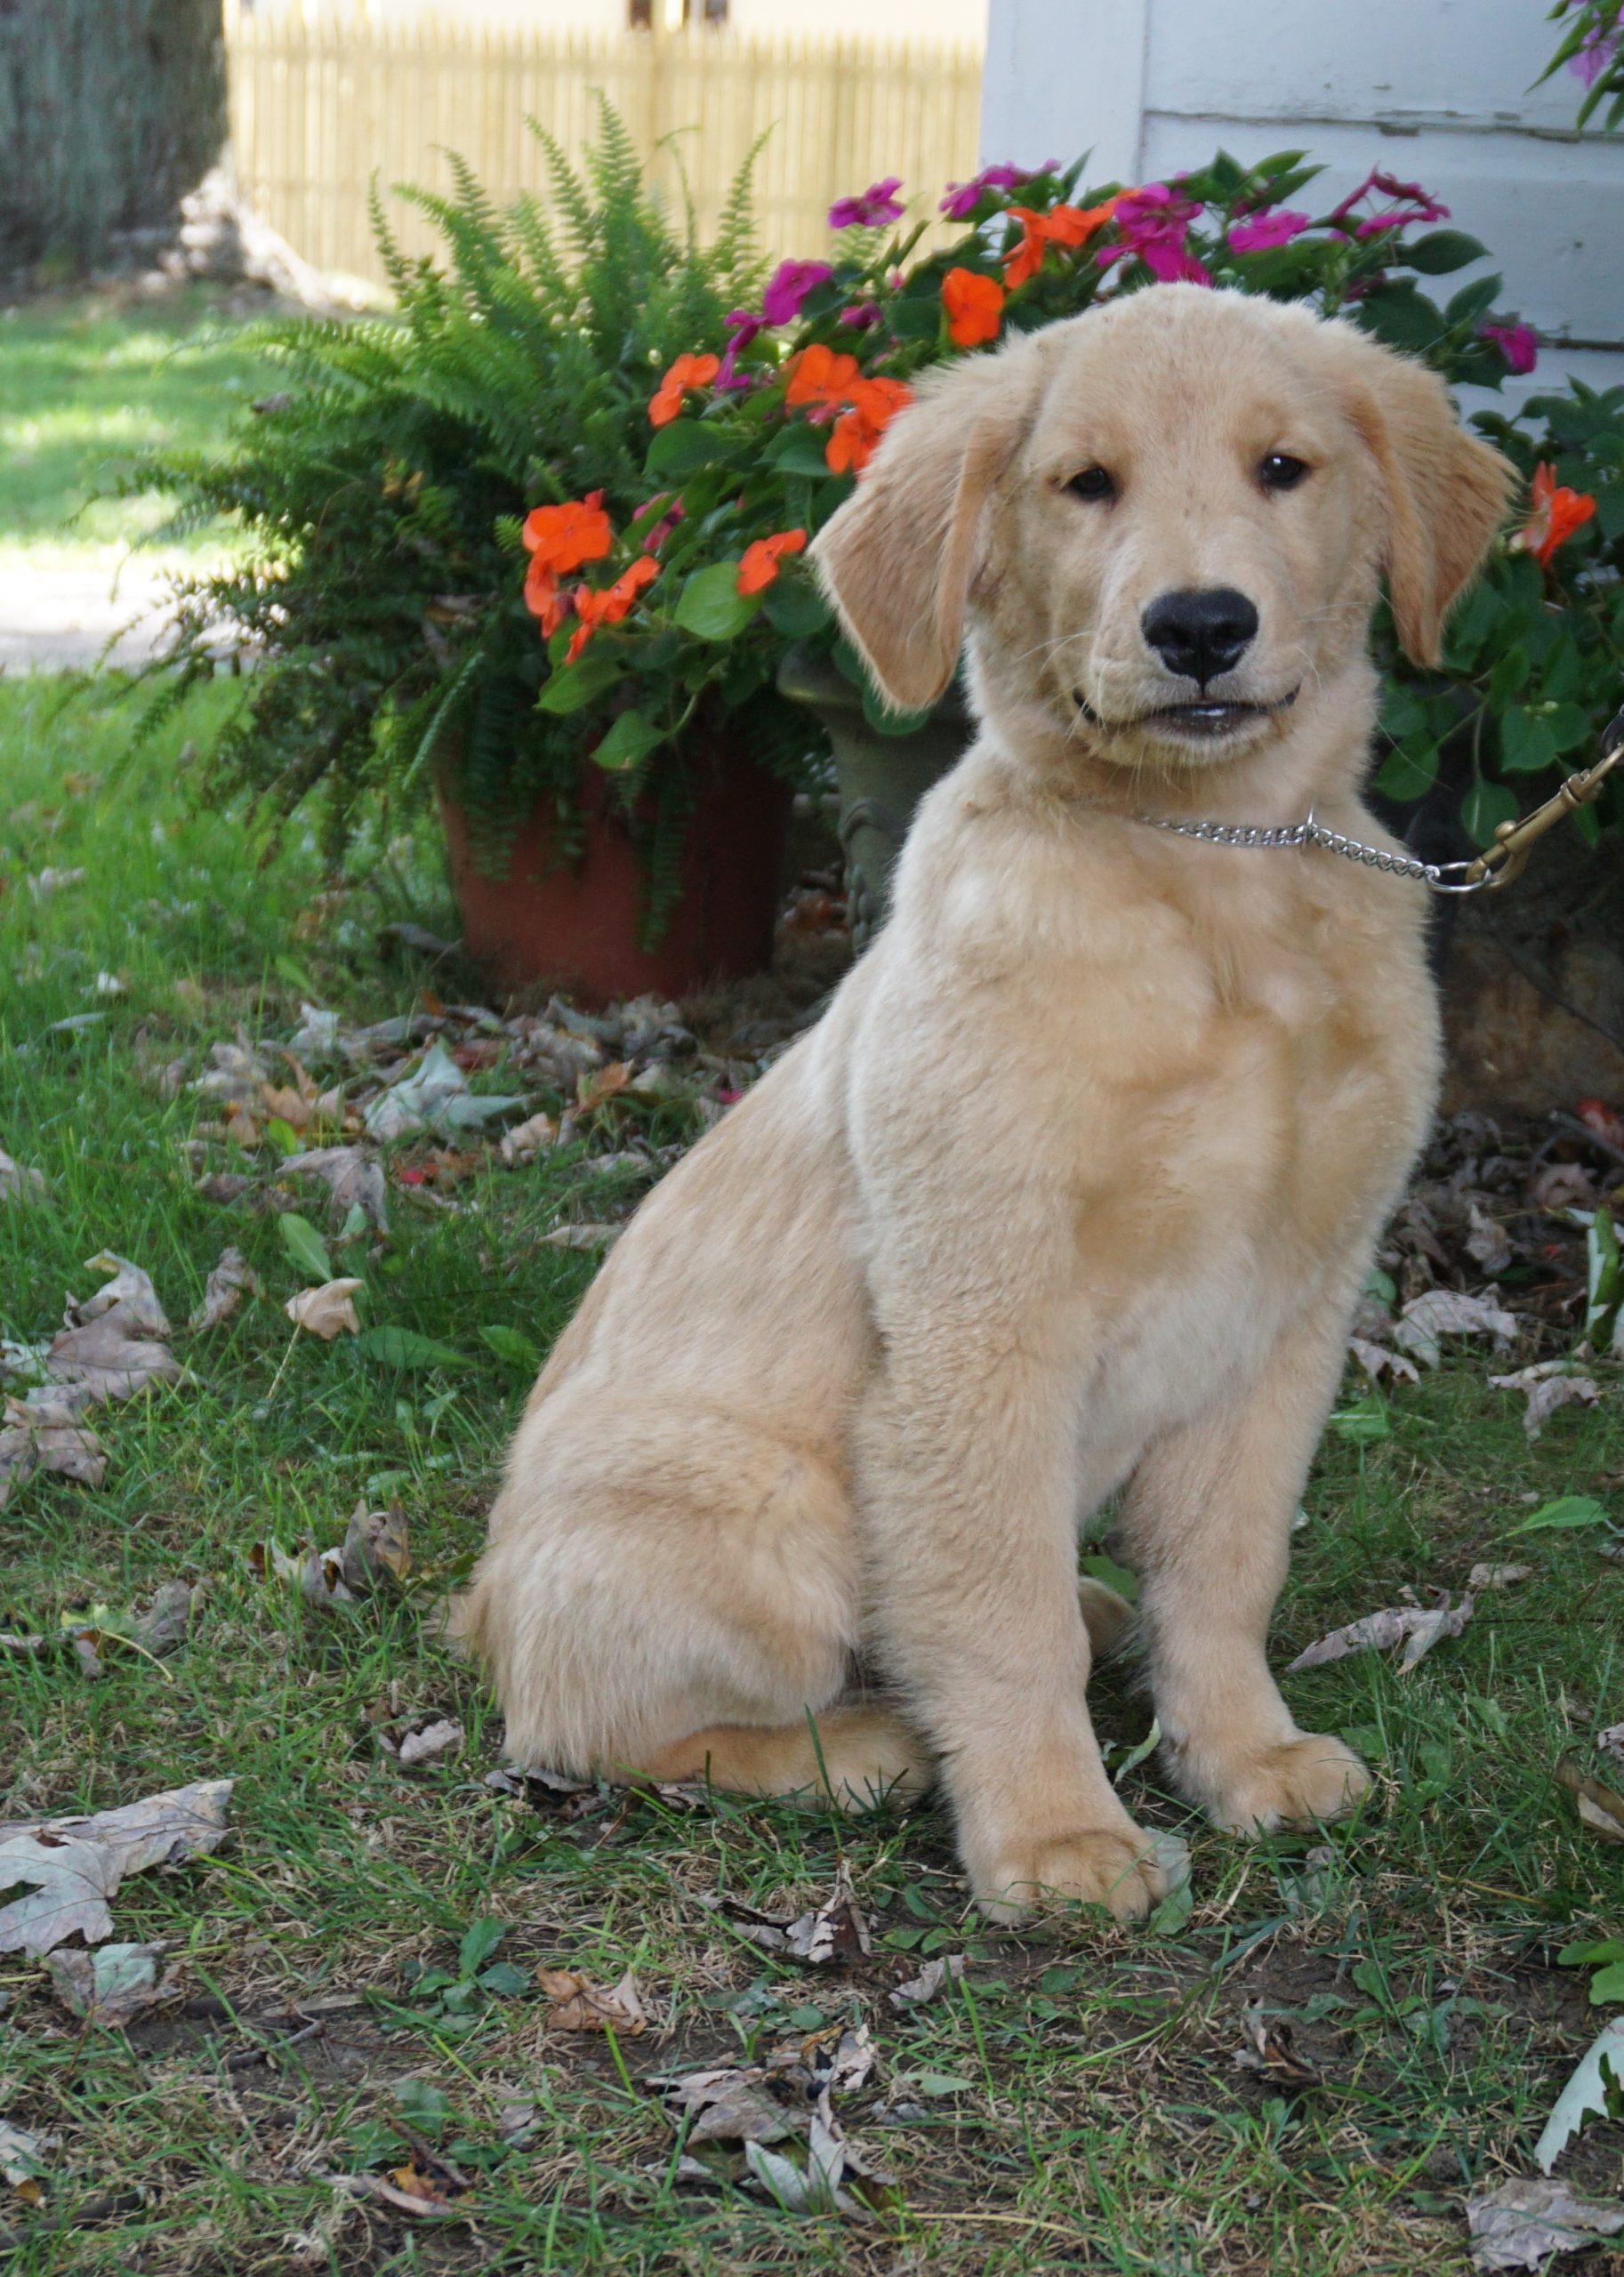 Ranger: AKC, Male, Golden Retriever Puppy Trained and For Sale